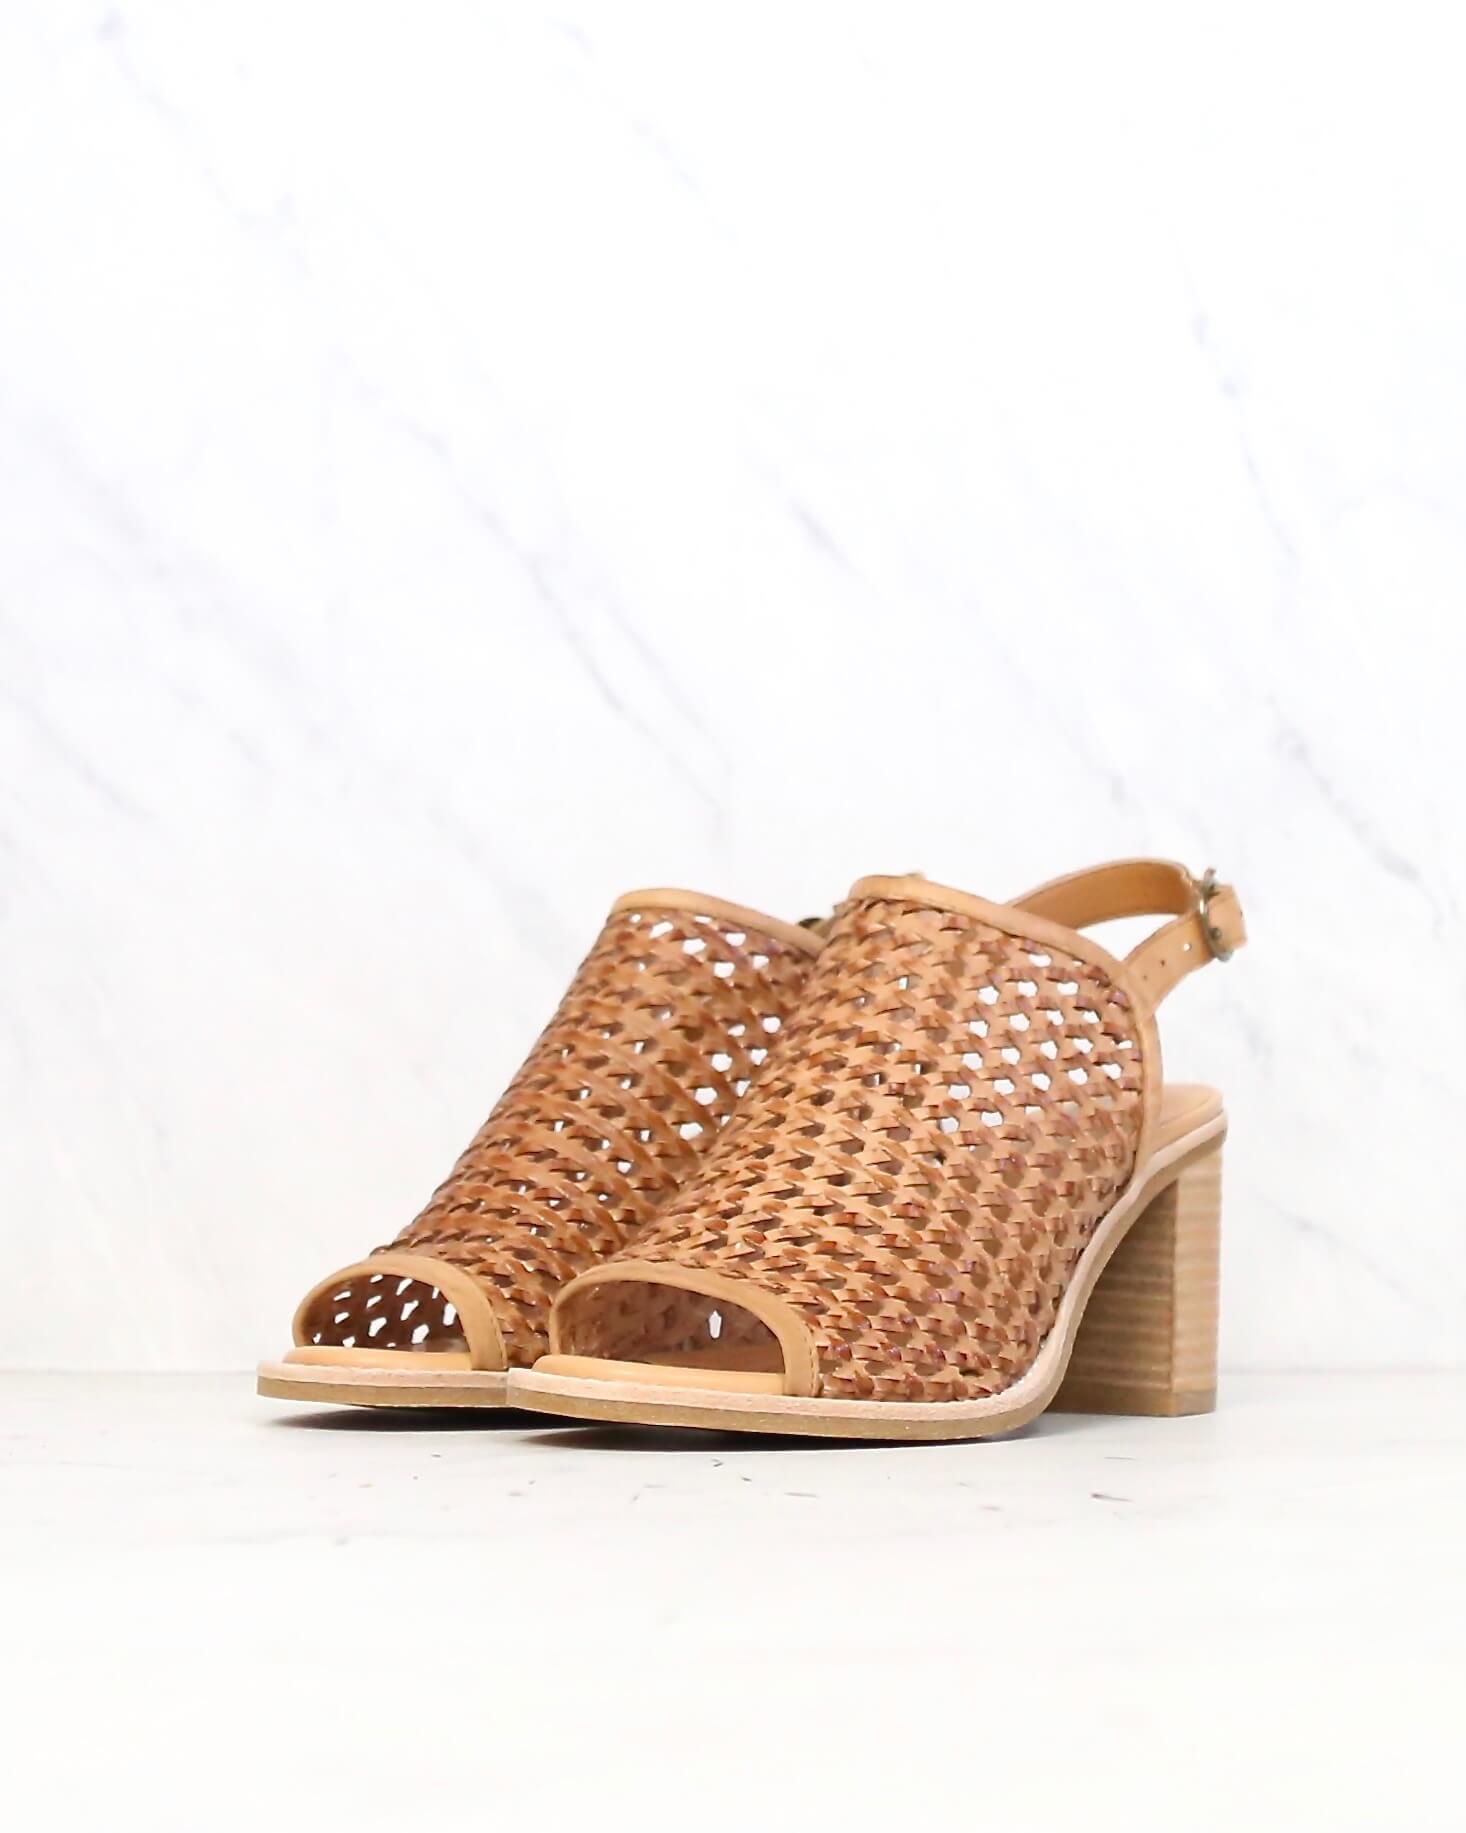 Woven City Heel with Ankle Strap in Tan 